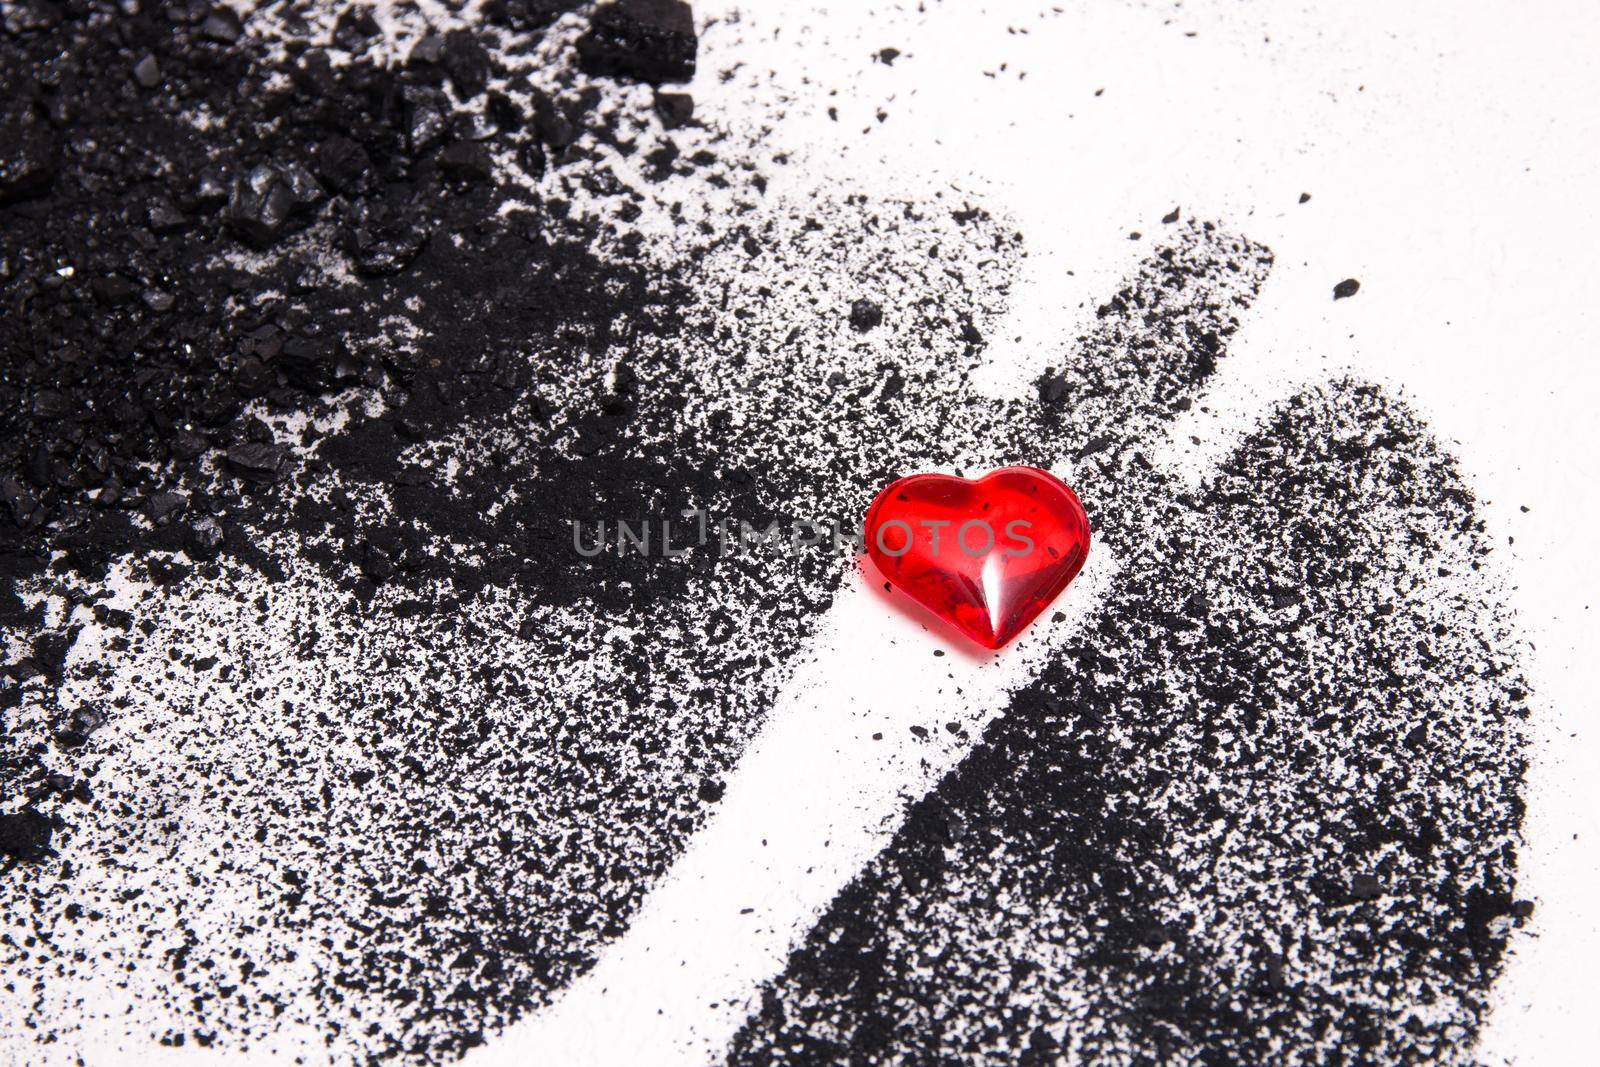 silhouette of human lungs from coal dust on a white background, lungs from pieces of coal and a small red glass heart, health care concept, respiratory diseases, copy space